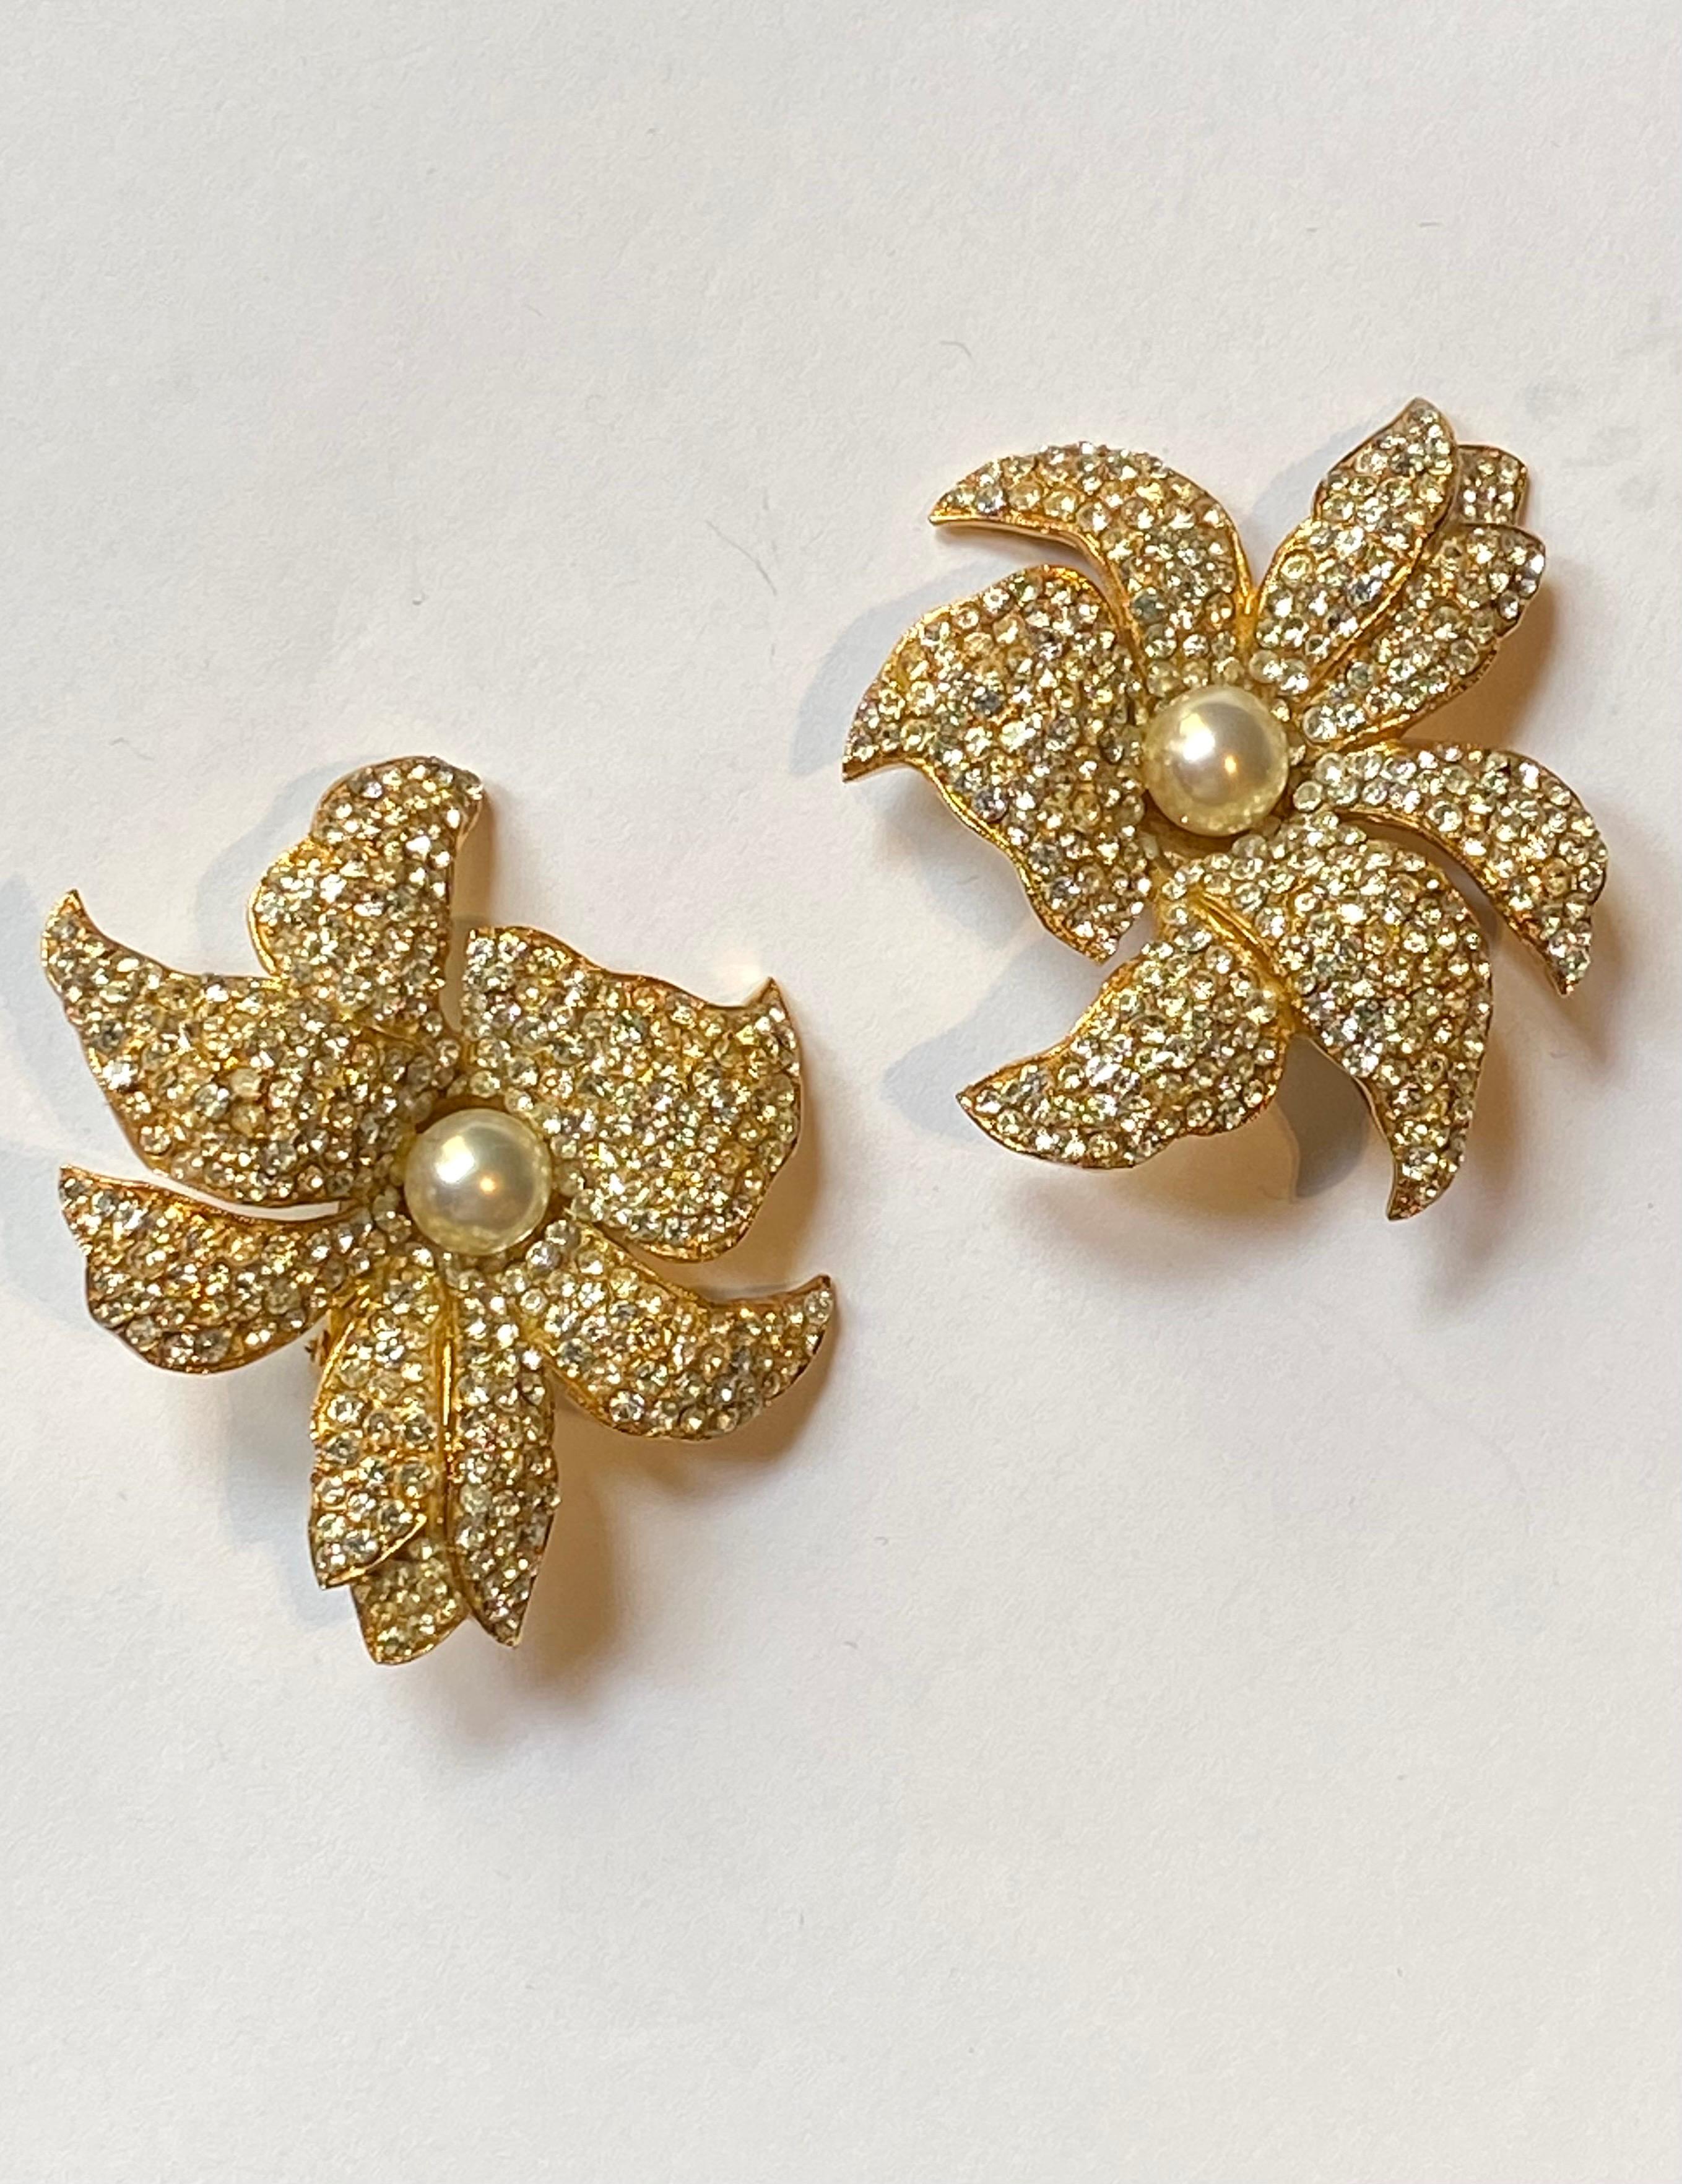 Borbonese, Italy Gold with Pave' Rhinestone Large Flower Earrings 6